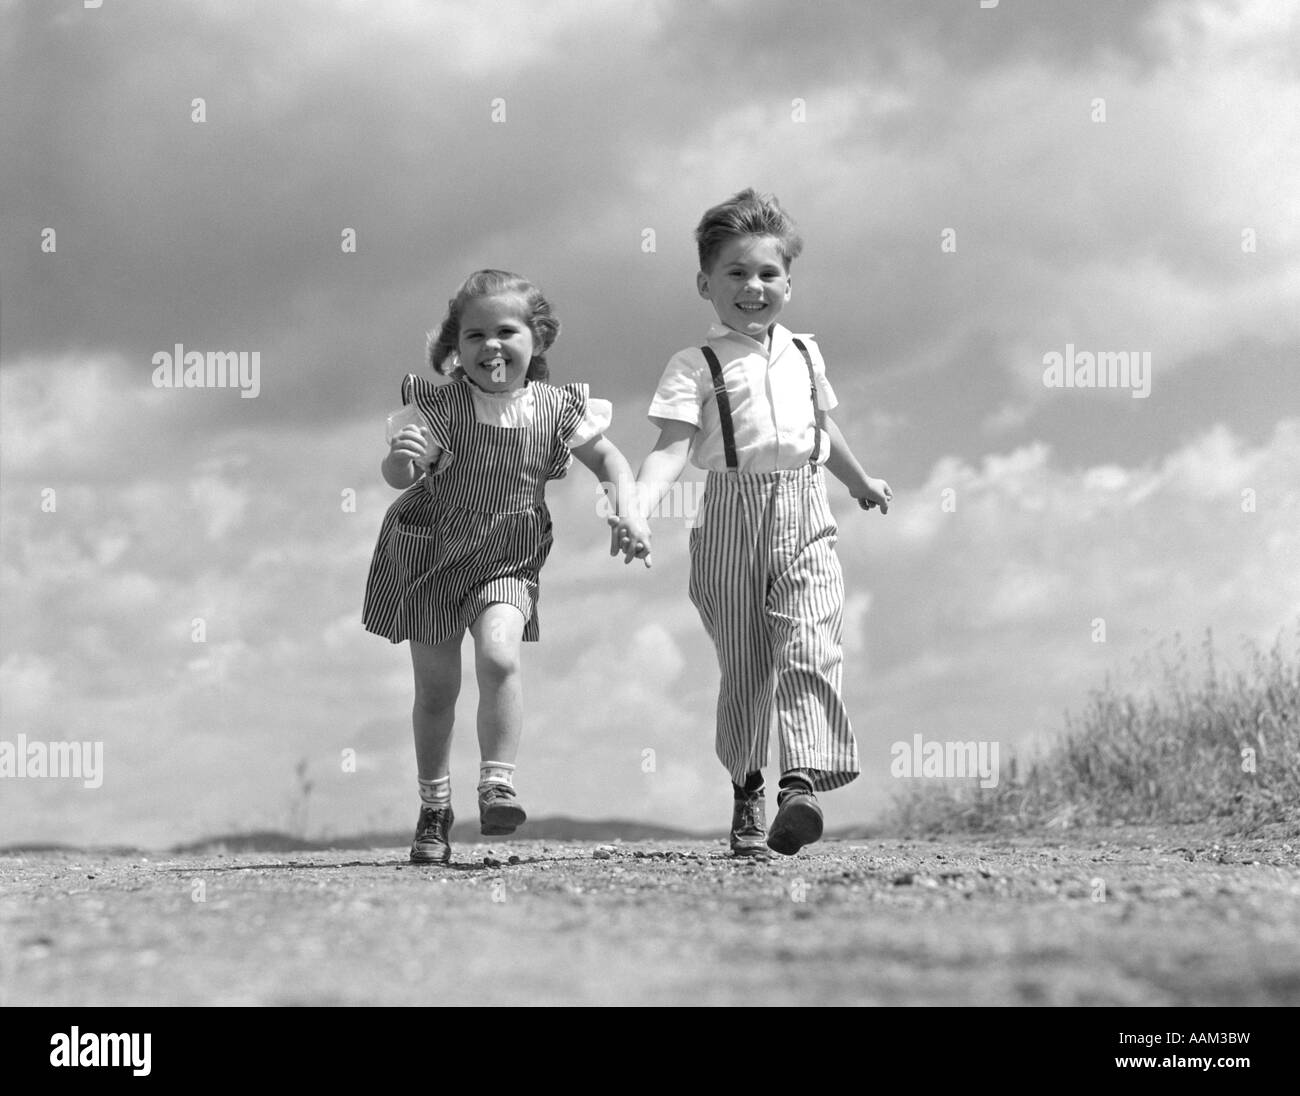 1940s 1950s BOY GIRL HOLDING HANDS RUNNING DOWN DIRT ROAD CLOUDS SKY BEHIND HAPPY SMILING COUPLE FRIENDS FRIENDSHIP ROMANCE Stock Photo